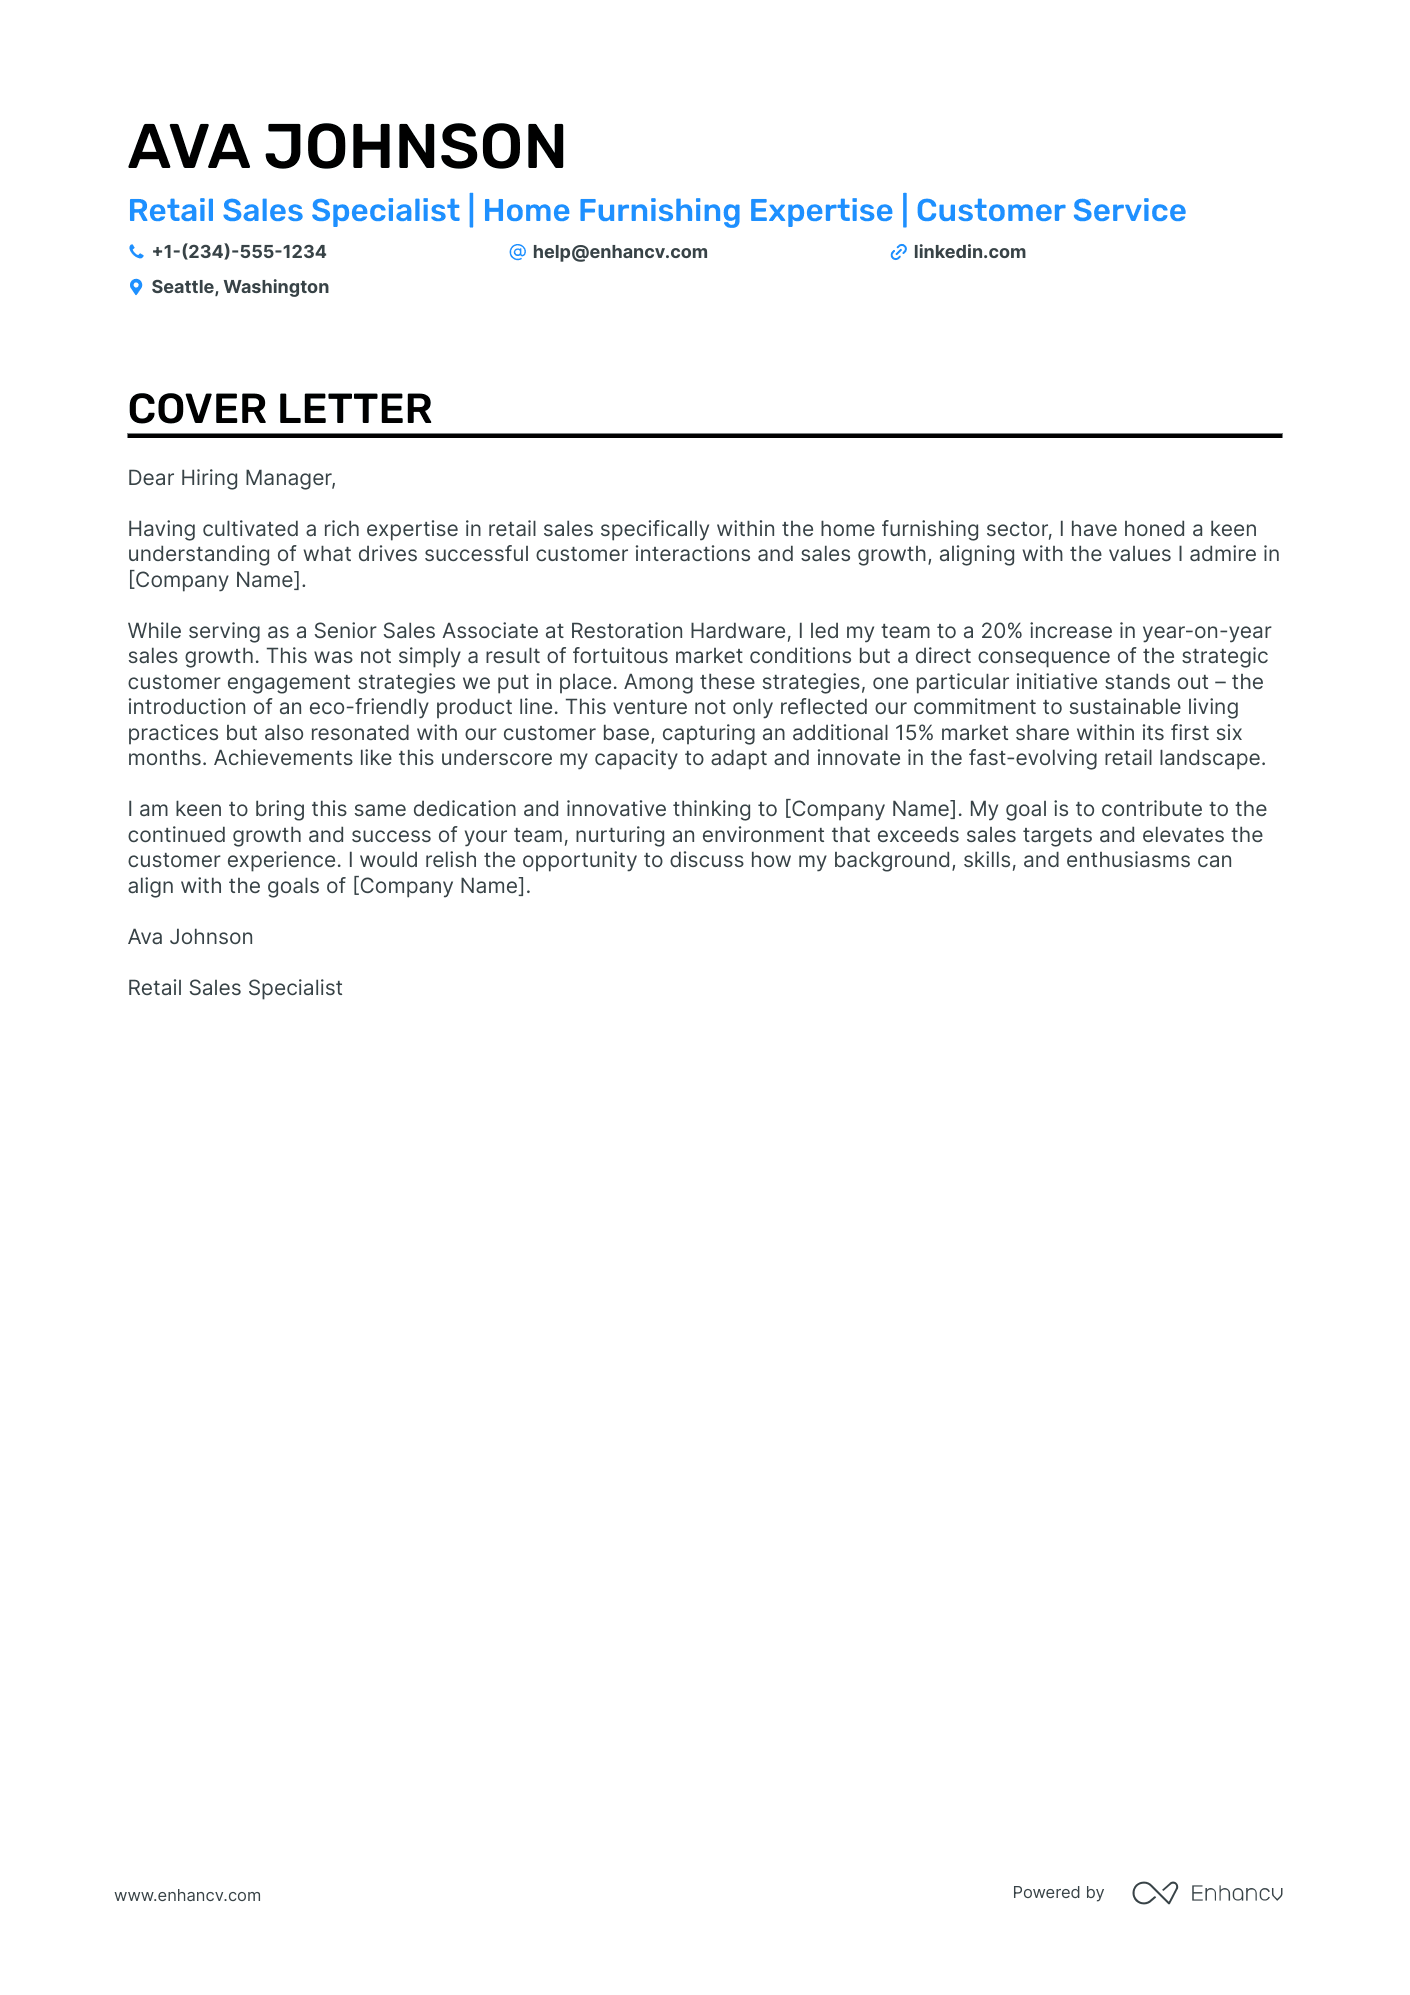 Retail Sales Consultant cover letter